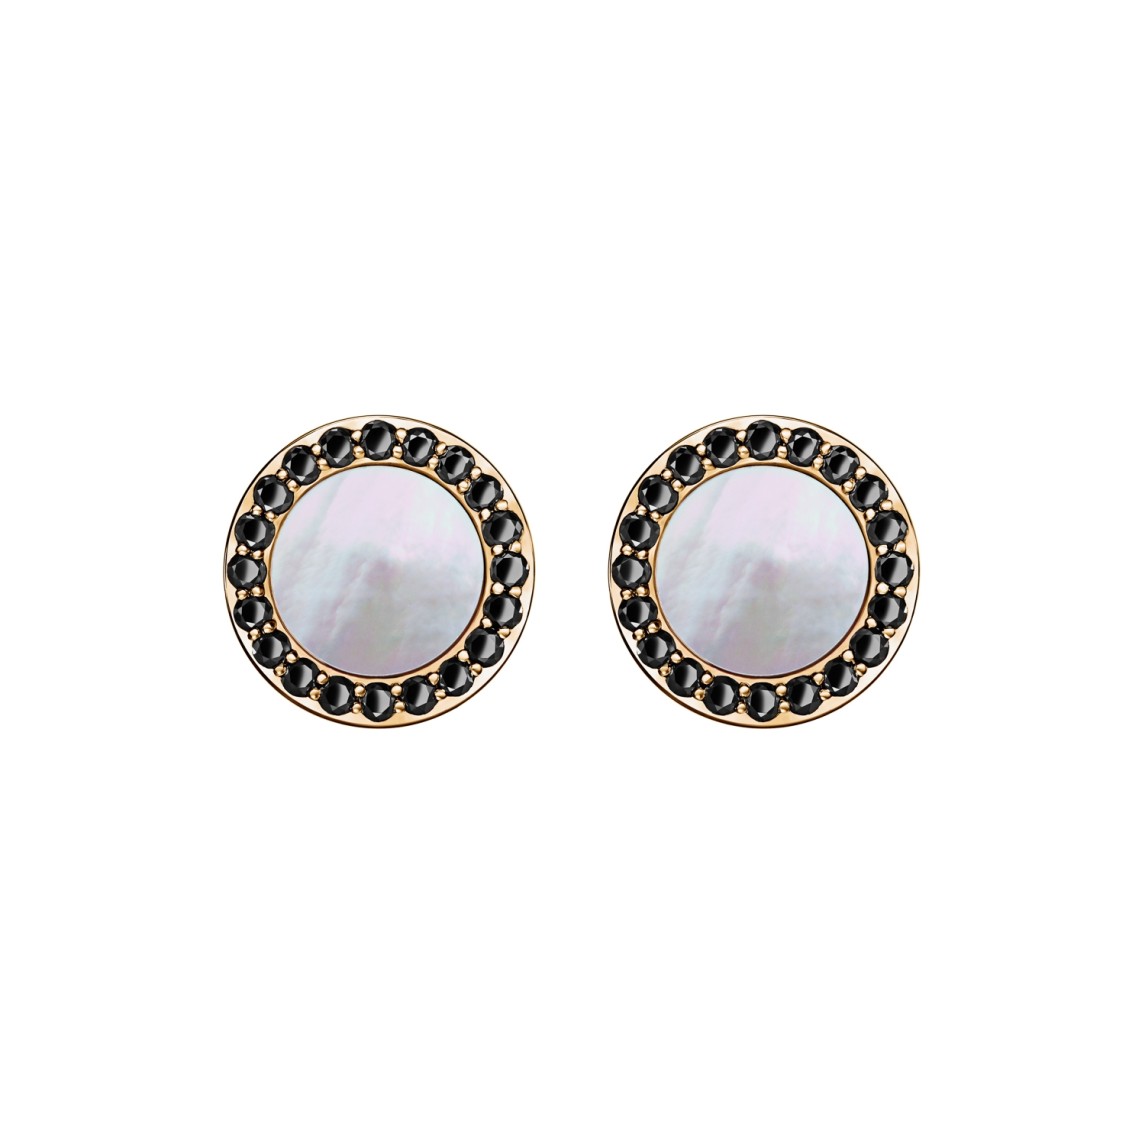 Yellow Gold Earrings With Black Diamonds And Mother Of Pearl